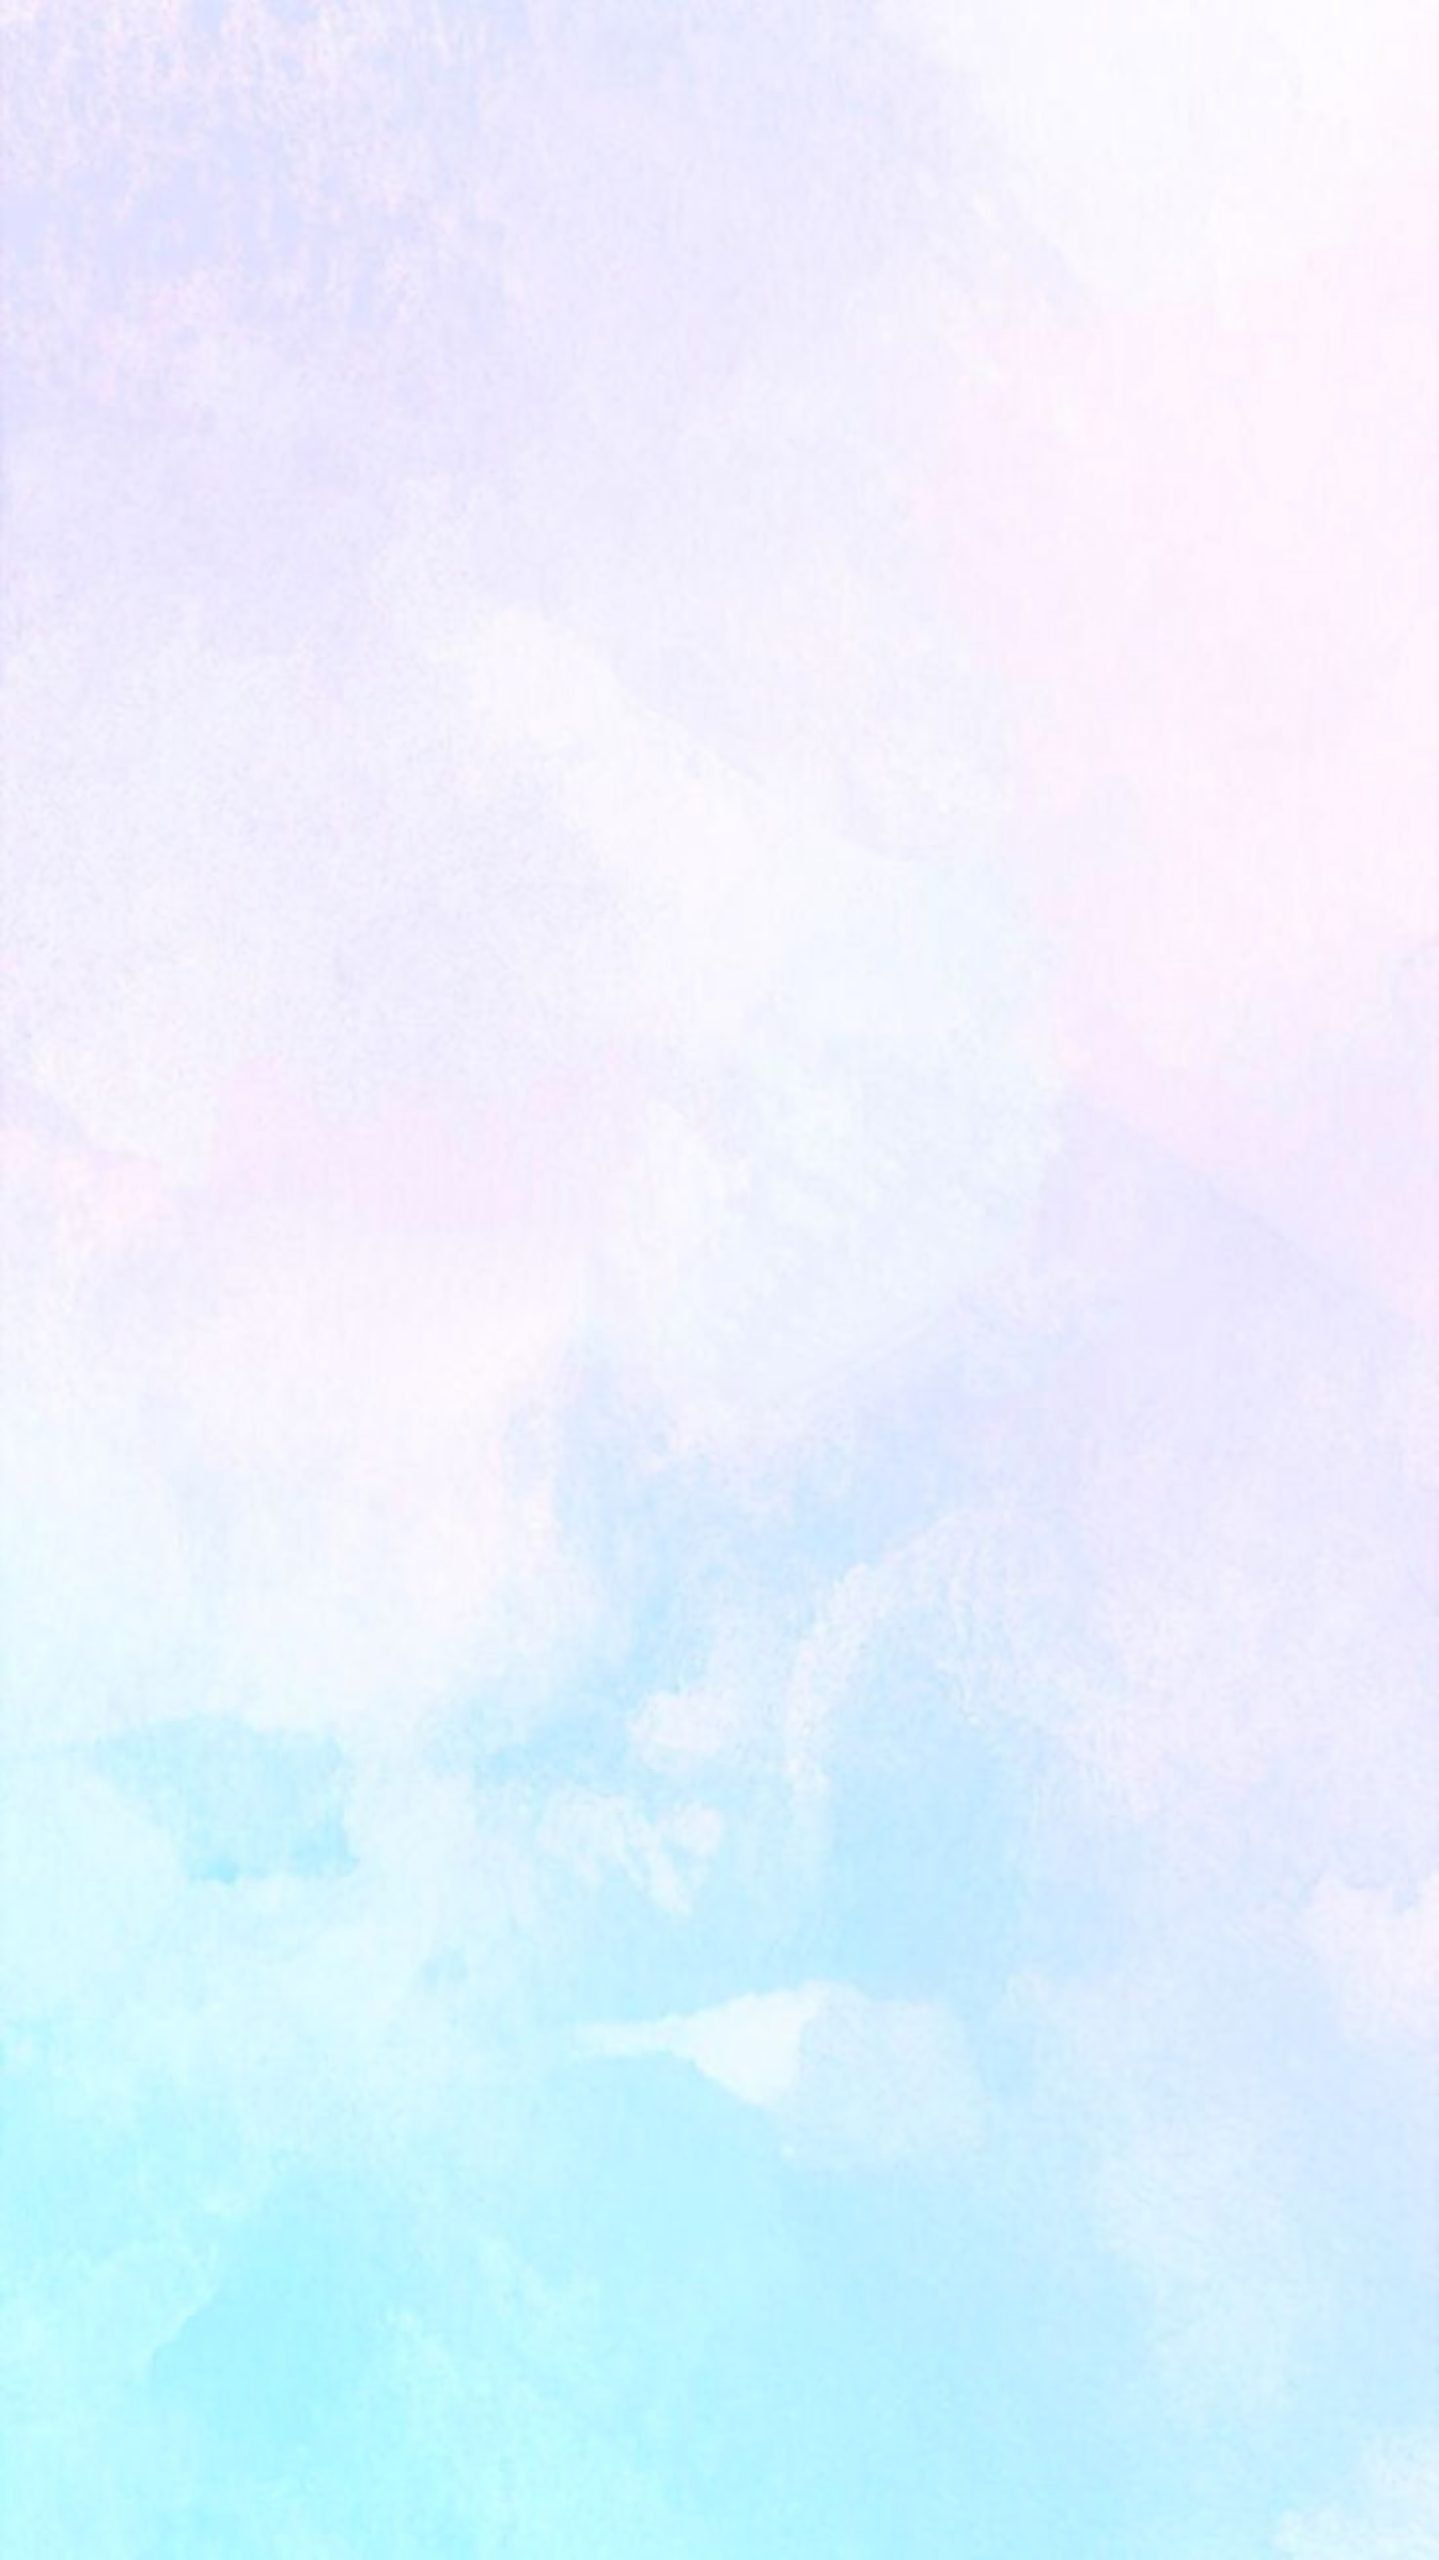 Download this free iPhone wallpaper with a soft pastel watercolor background. - Kawaii, pastel, travel, pastel rainbow, watercolor